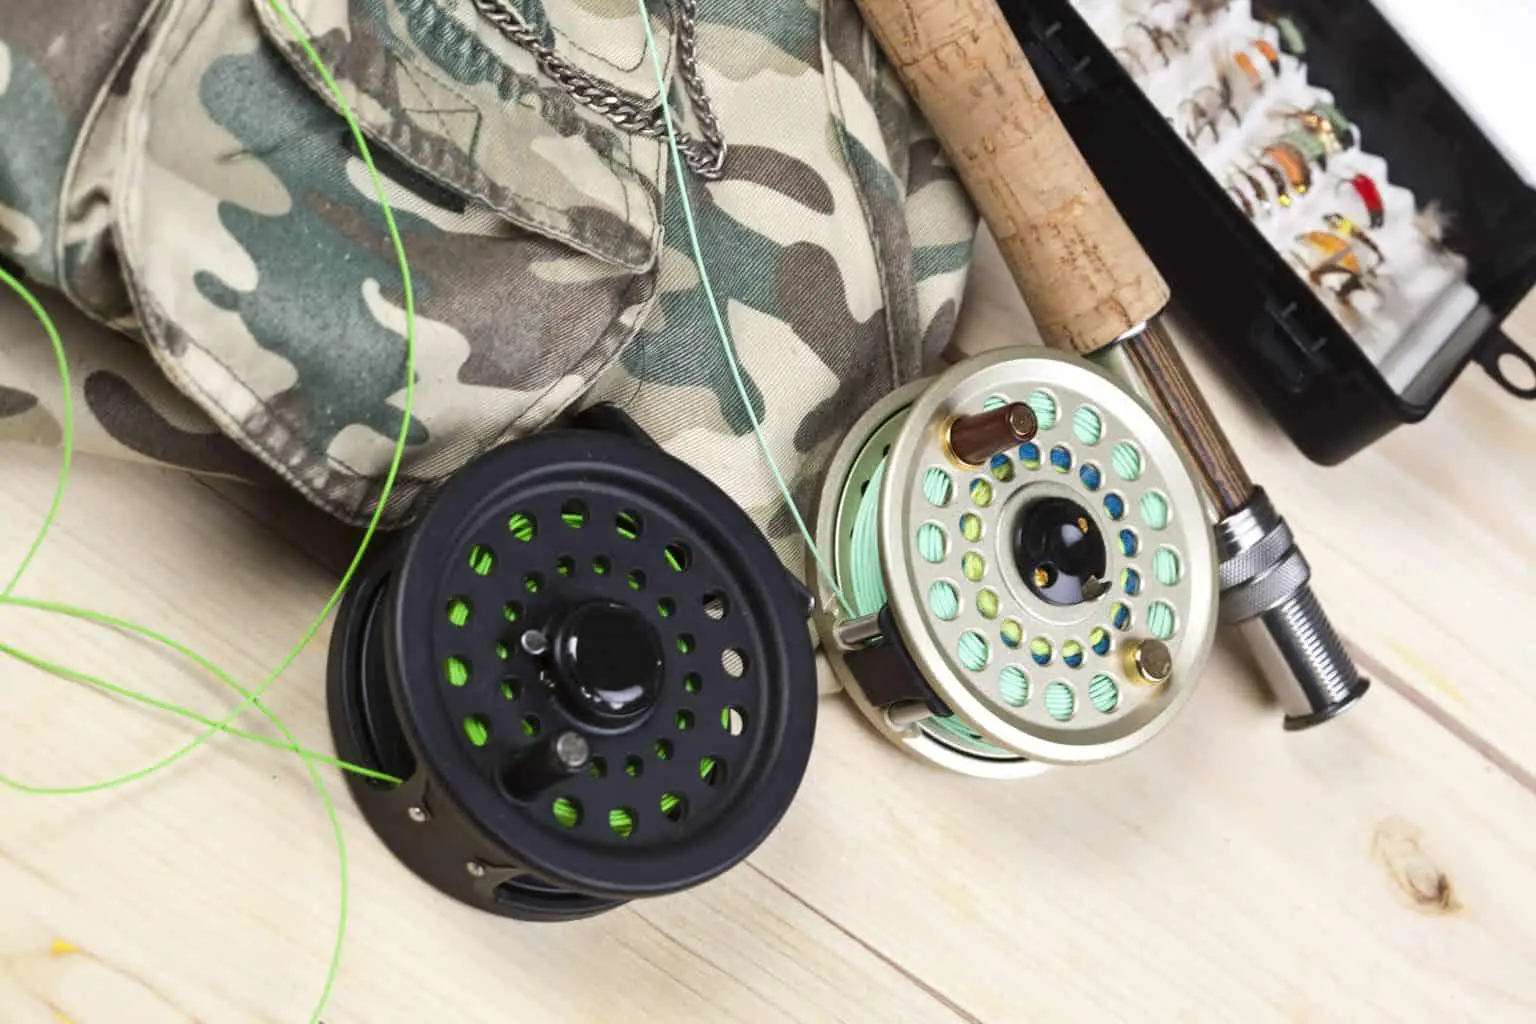 Mooching Reel vs Fly Reel - What are the differences. Fly reels on a wooden surface